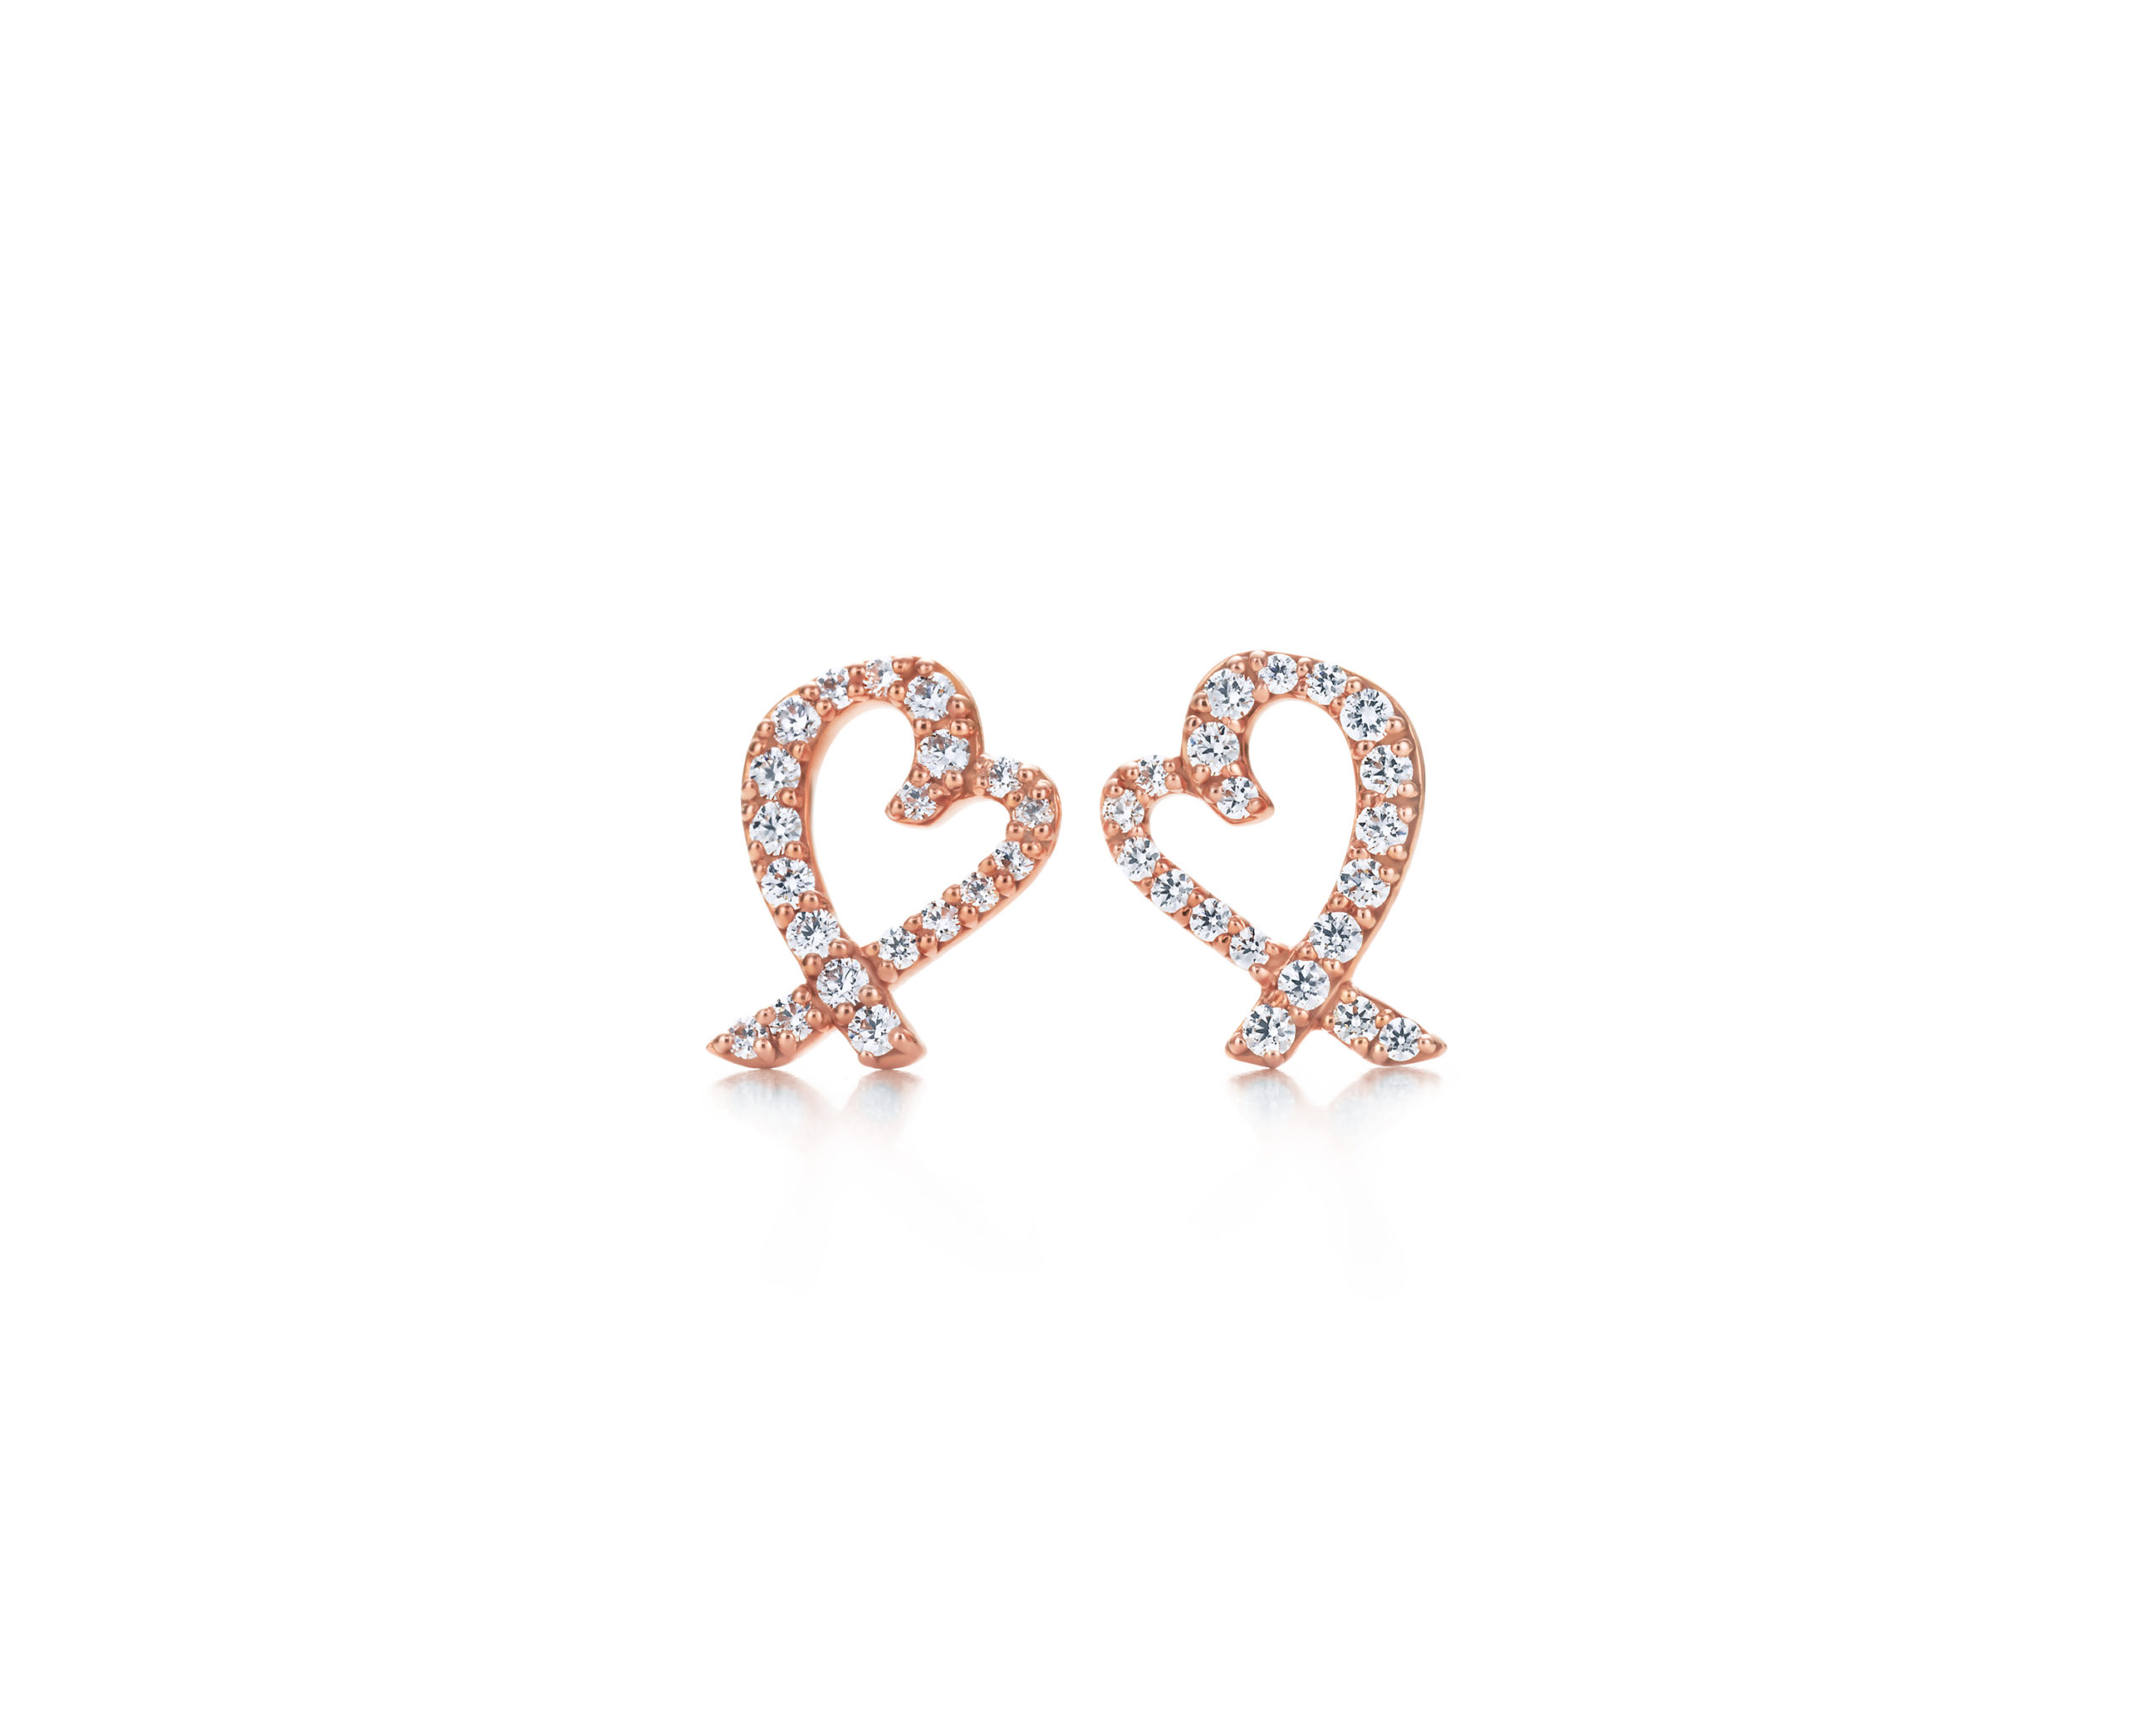 Paloma Picasso® Loving Heart earrings in 18k rose gold with 